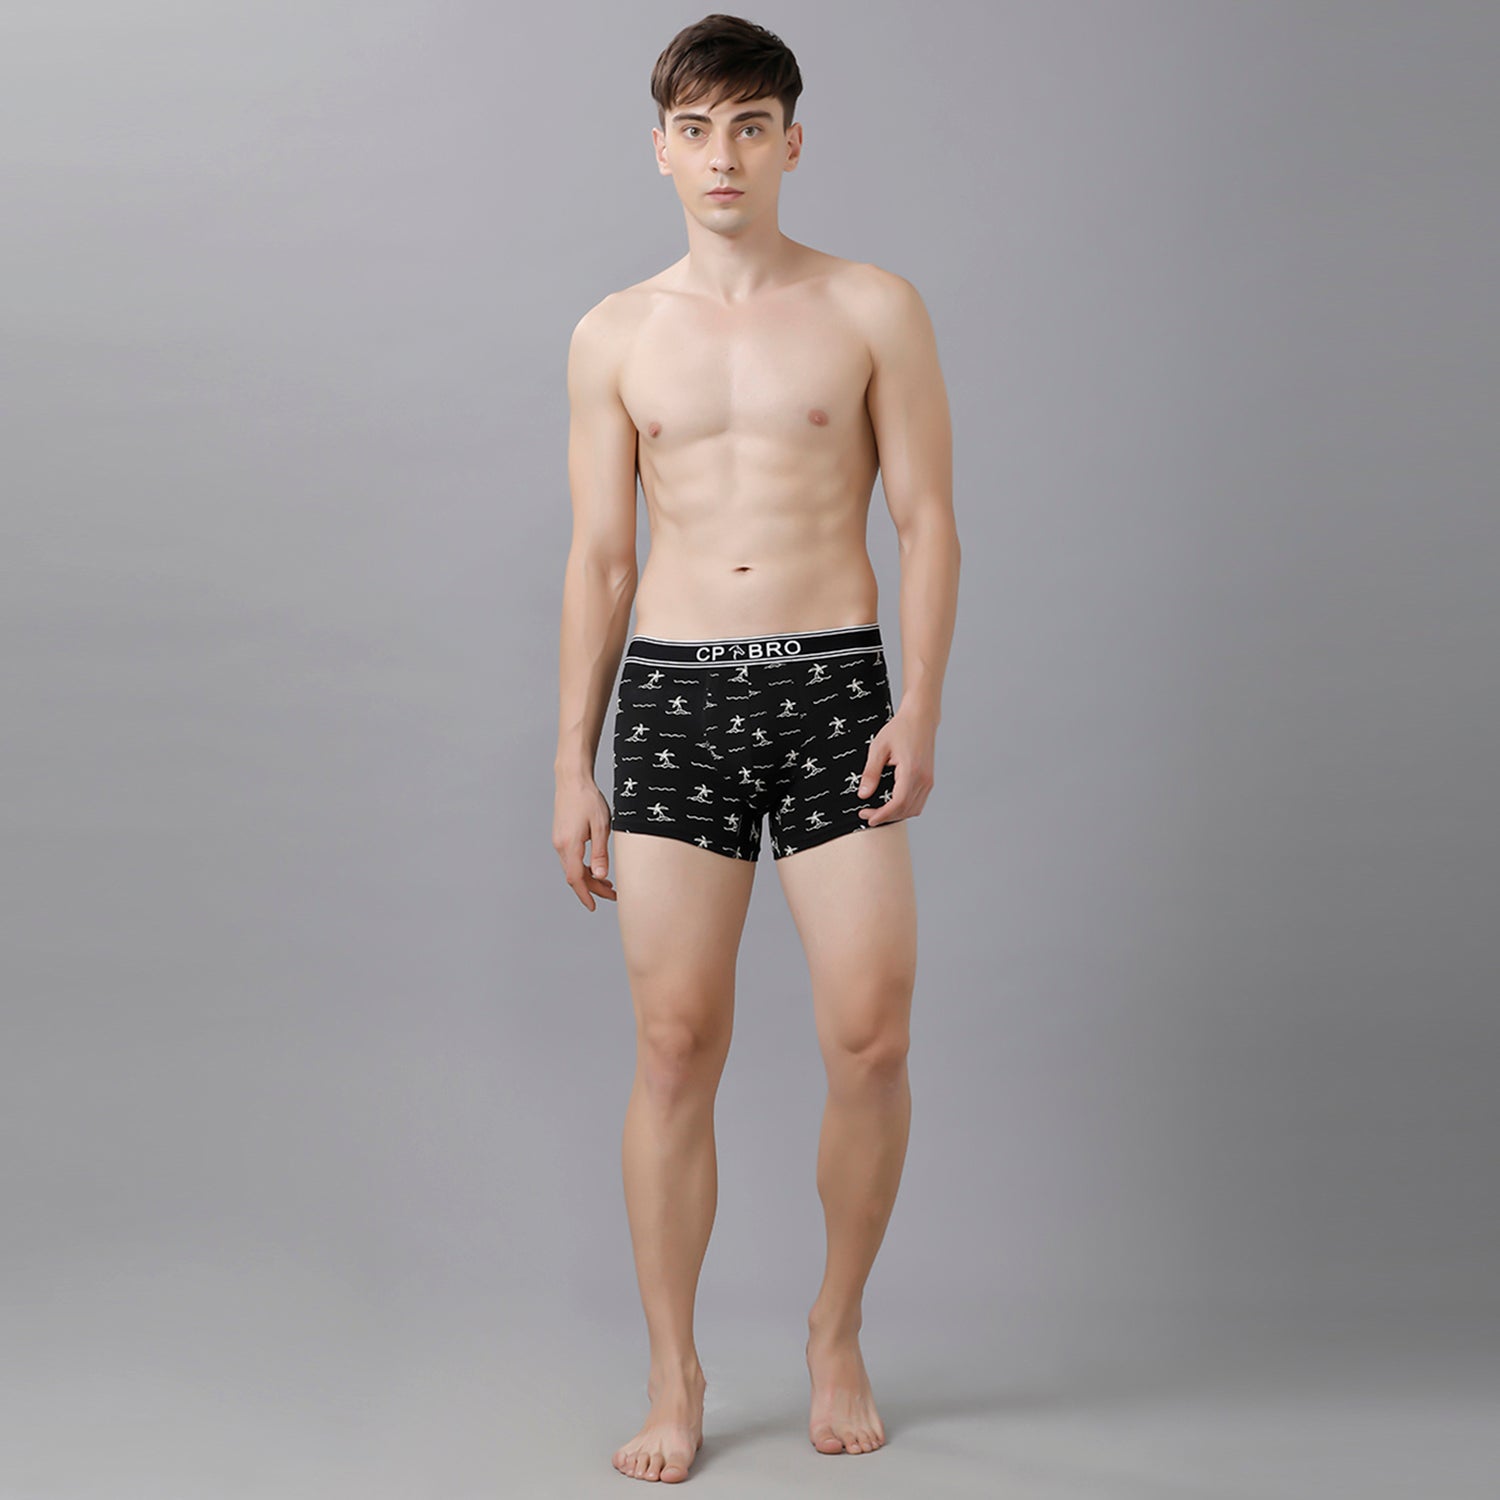 CP BRO Men's Printed Trunks with Exposed Waistband - Black Print